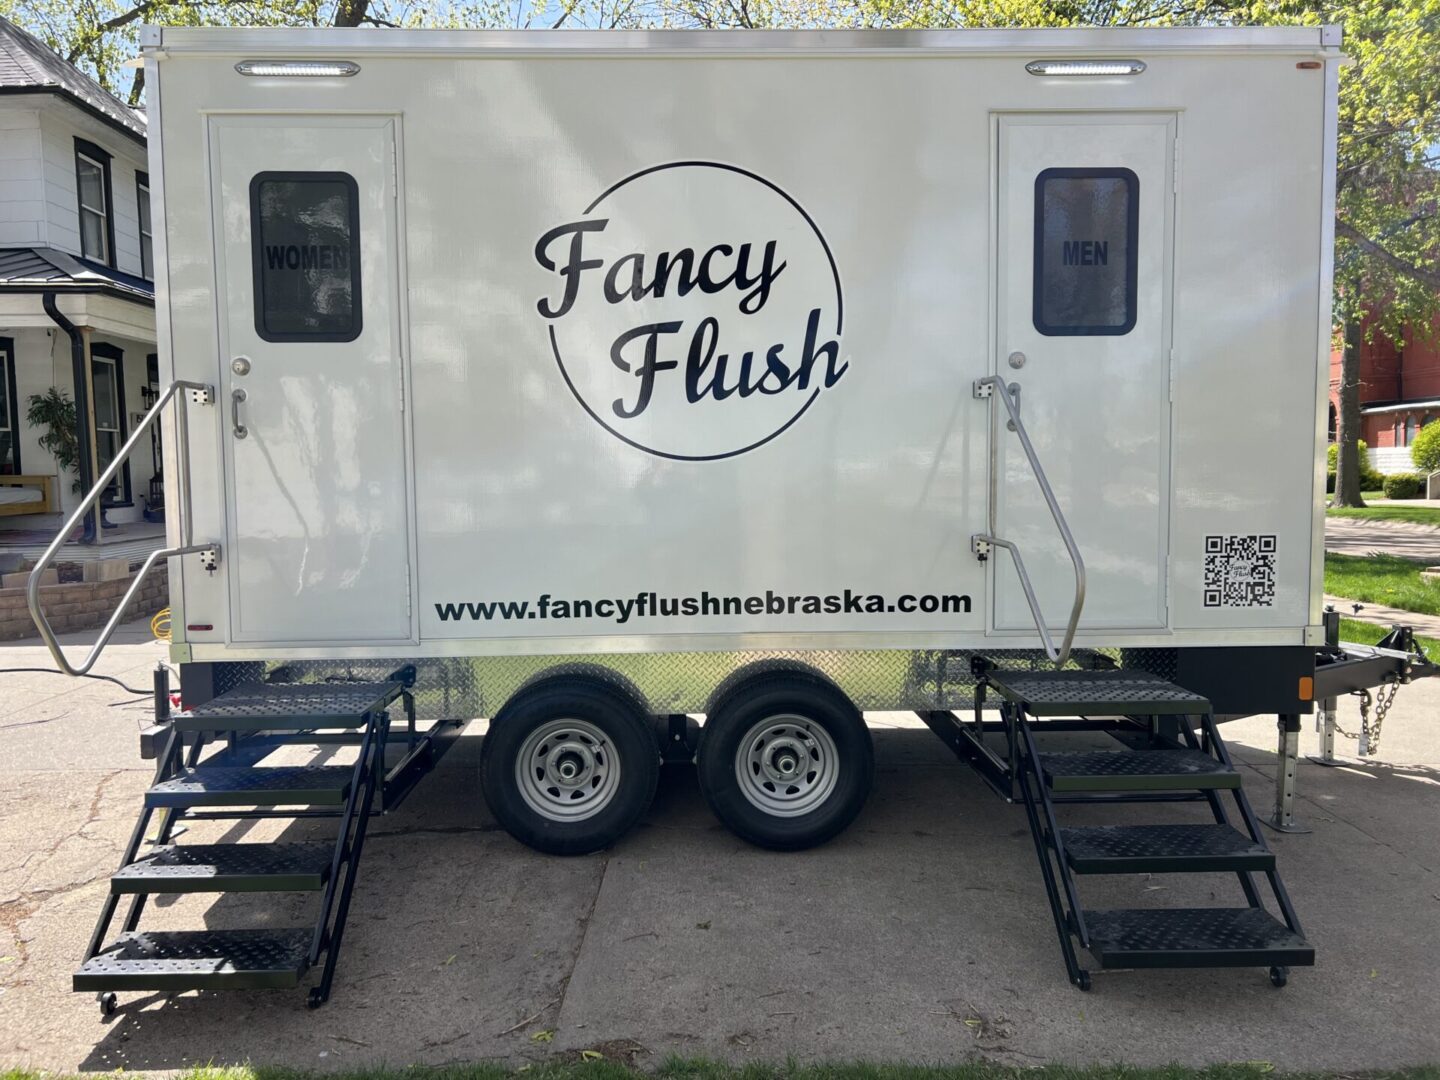 front view of the The Fancy Flush trailer